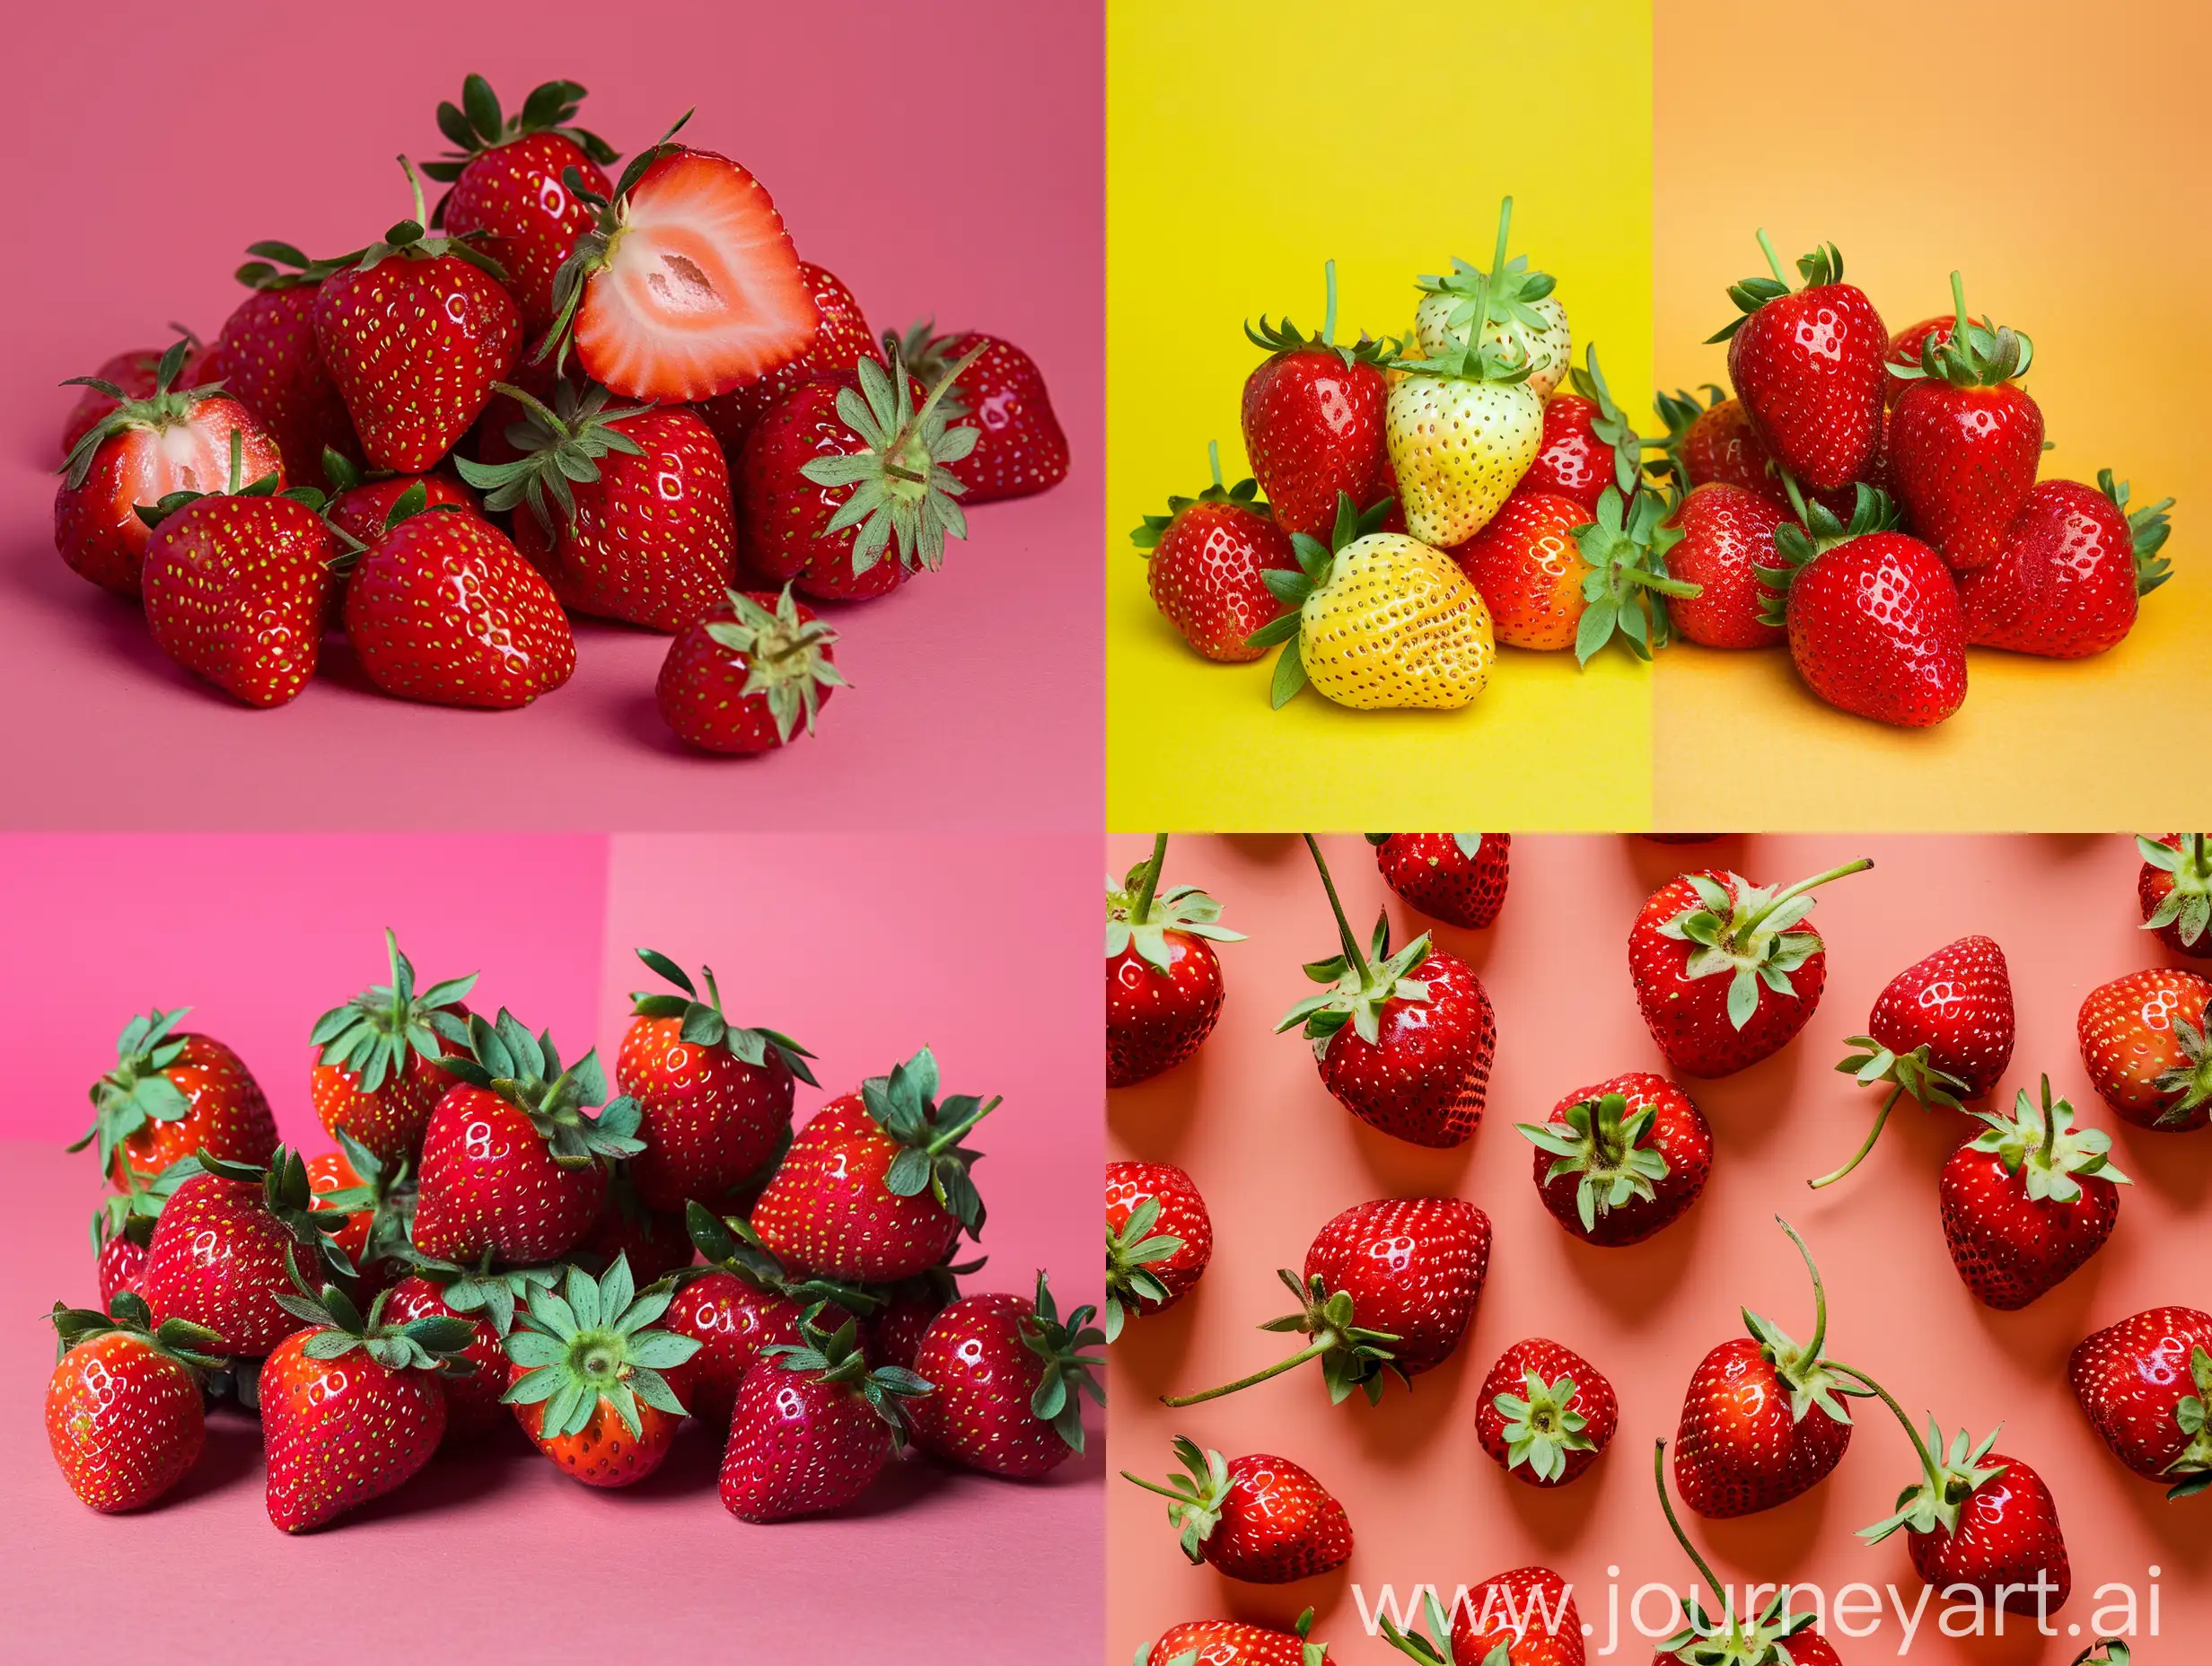 Studio photography with a background of one color of strawberries